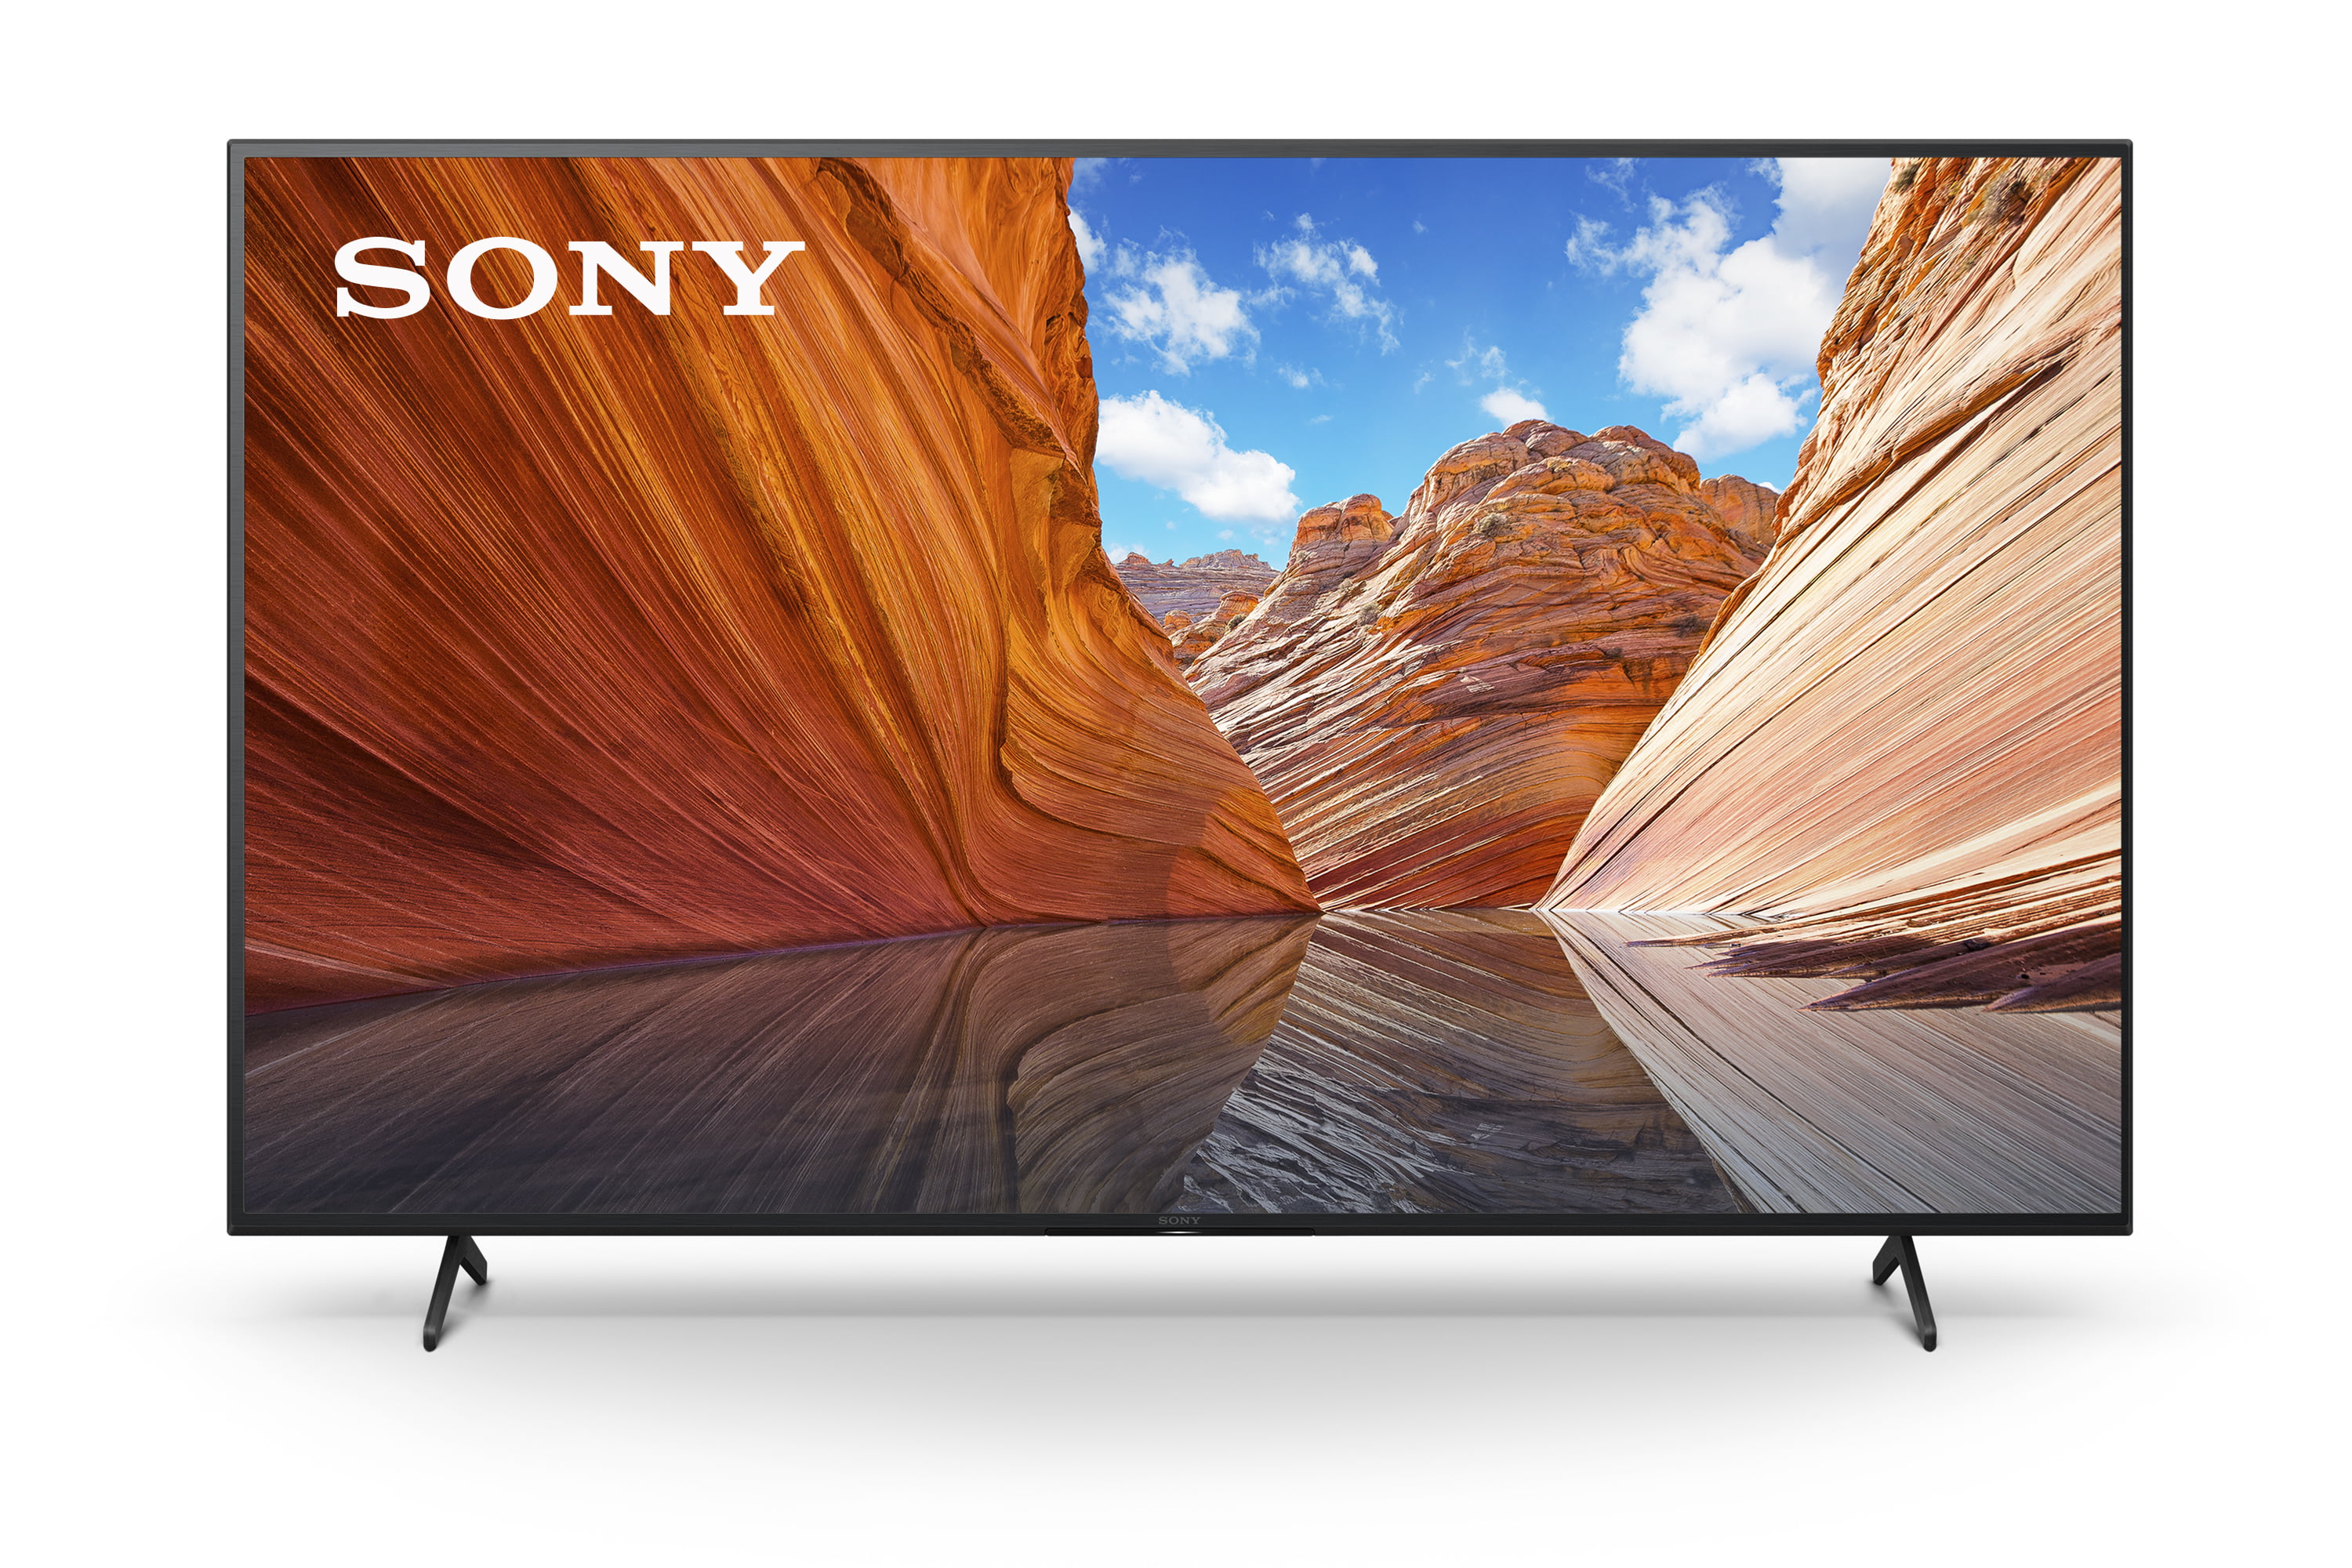 Sony 65" Class KD65X80J 4K Ultra HD LED Smart Google TV with Dolby Vision HDR X80J Series 2021 model - image 1 of 22